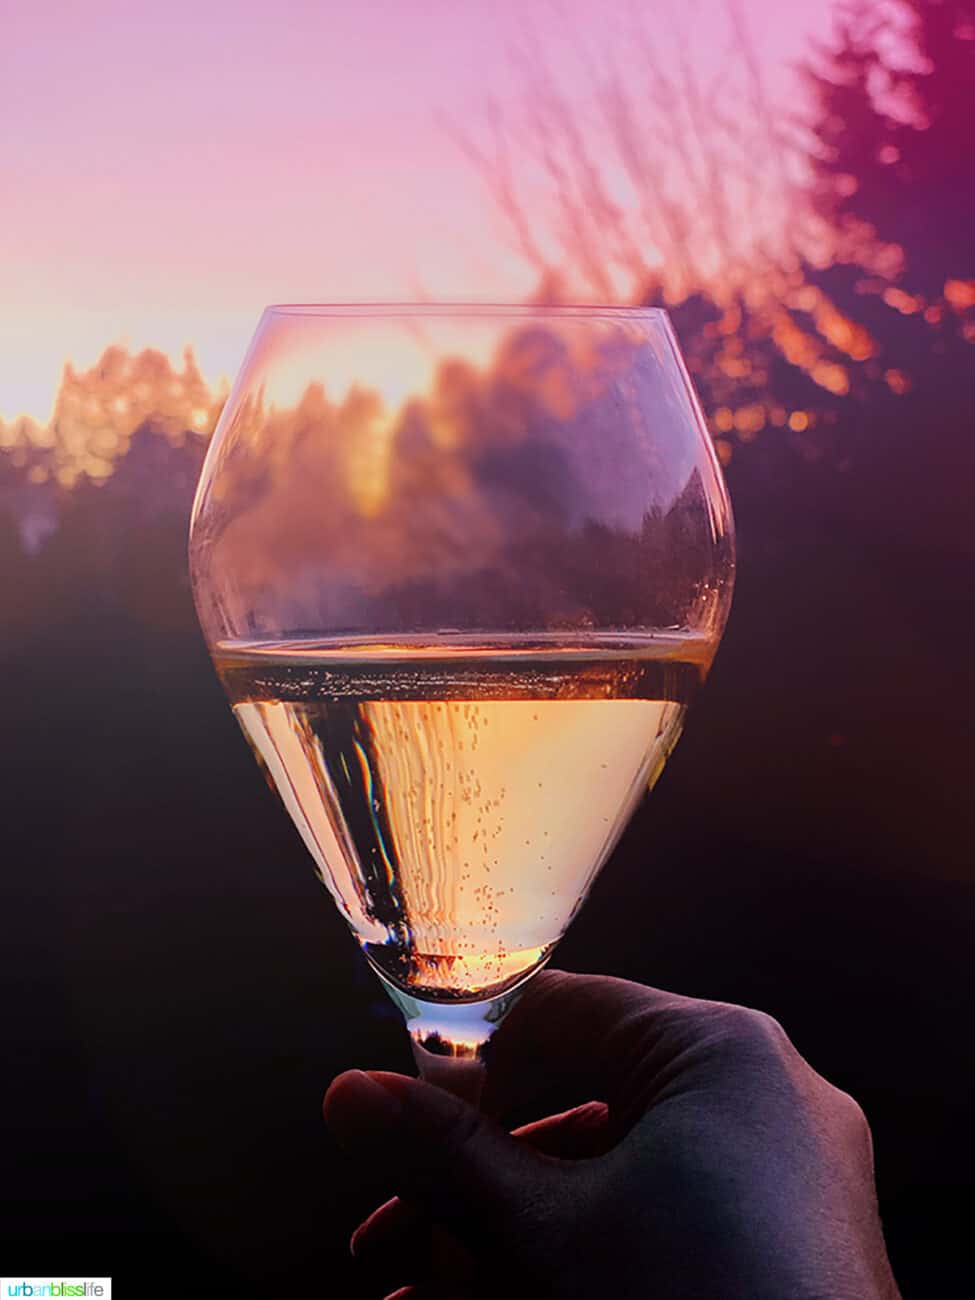 Champagne glass against sunset